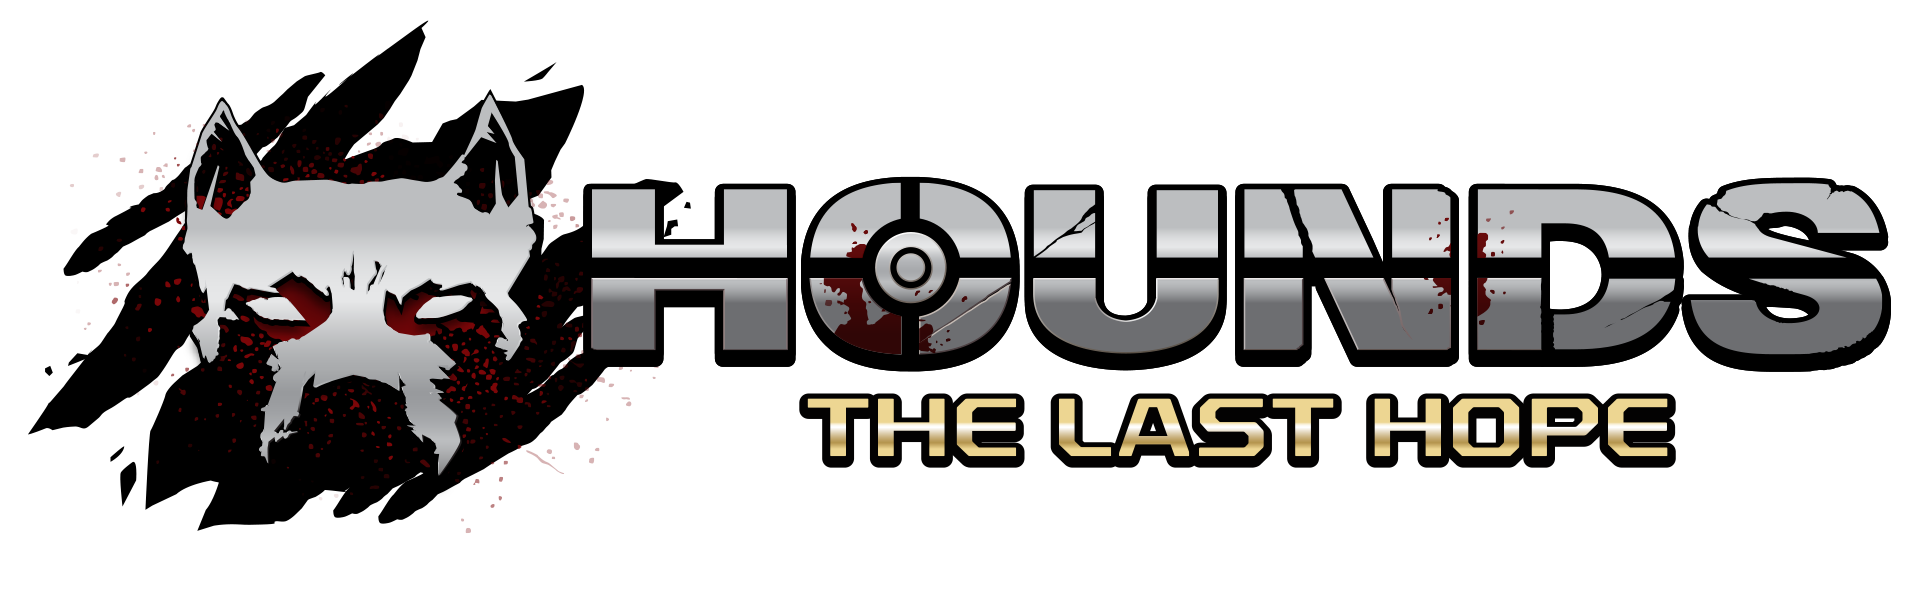 Hounds: The Last Hope is Opening Its Doors!